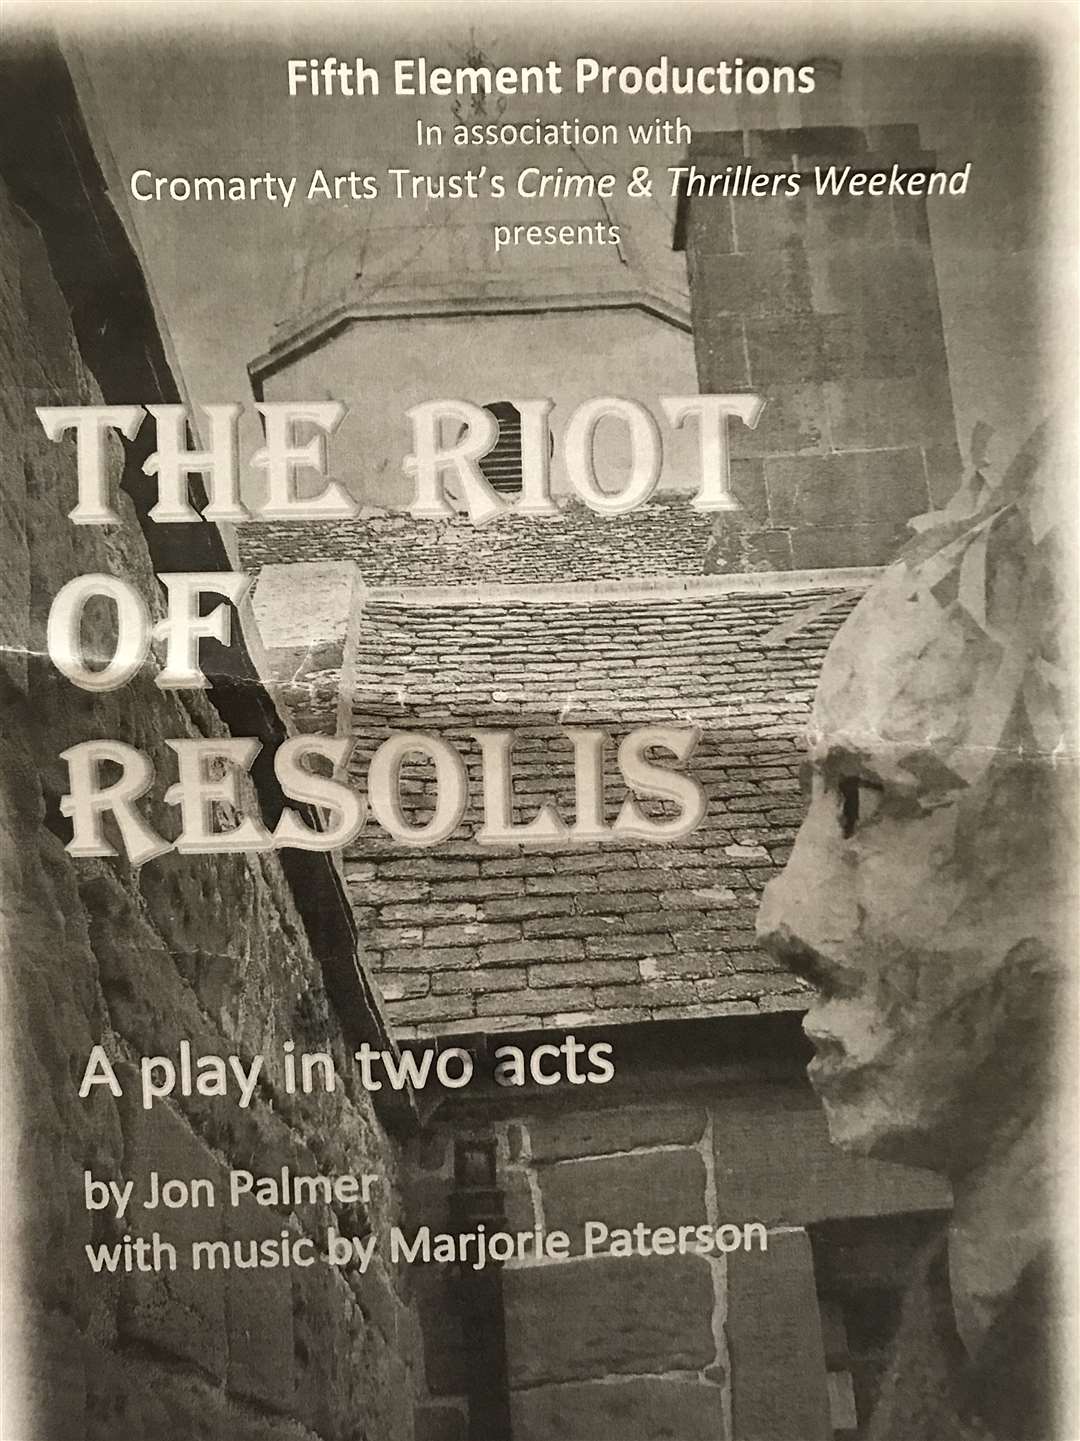 Programme for the play.